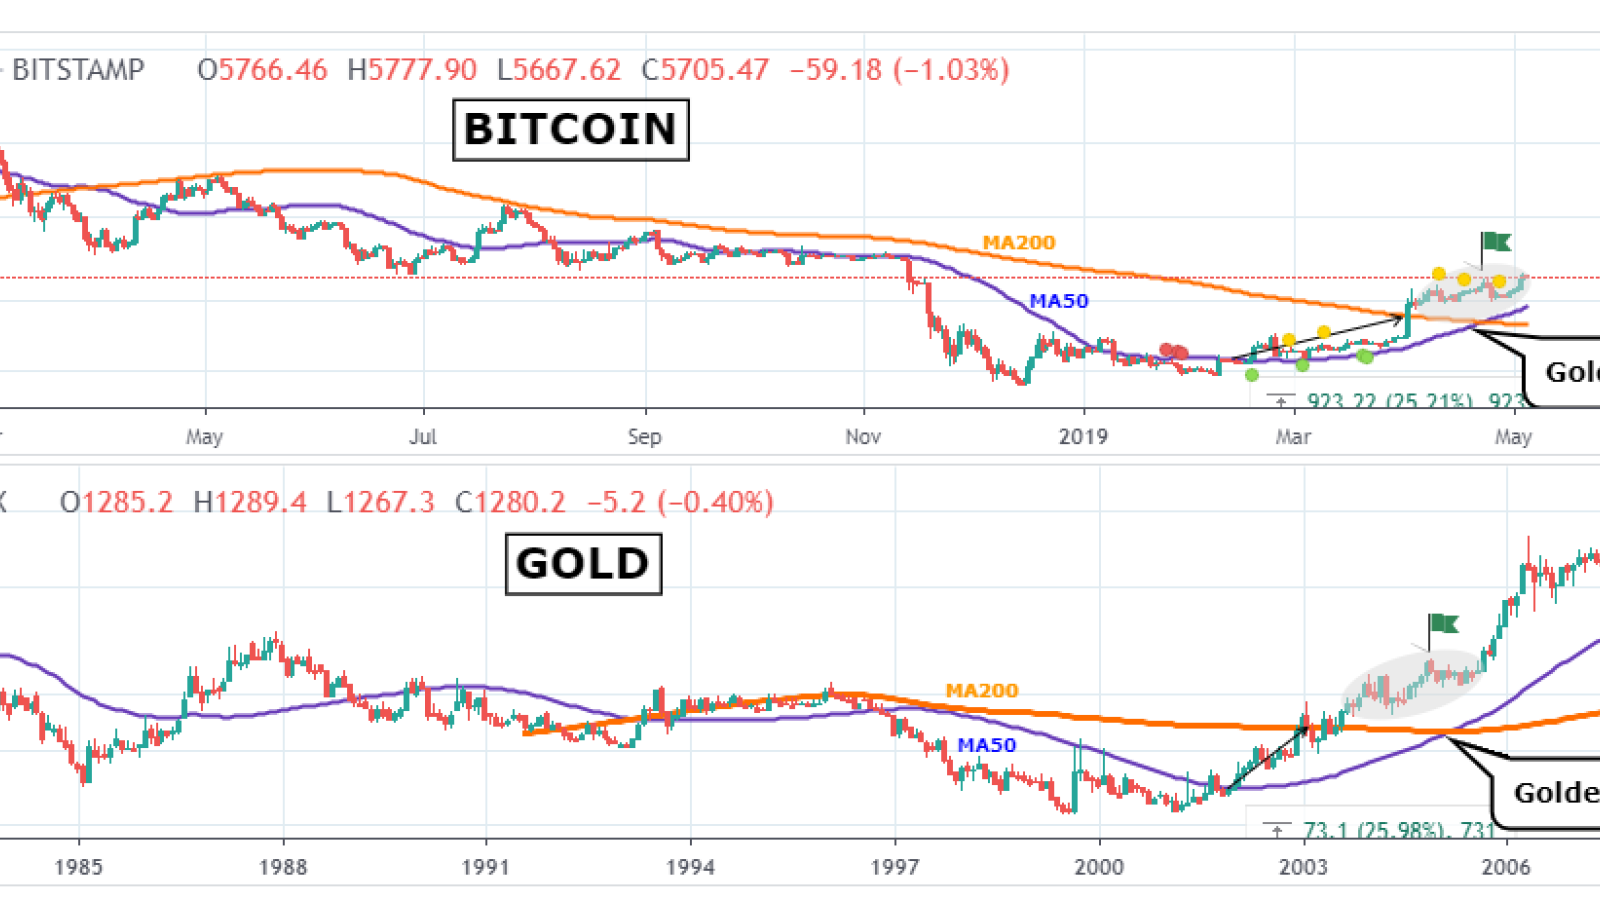 Comparing Bitcoin to gold  